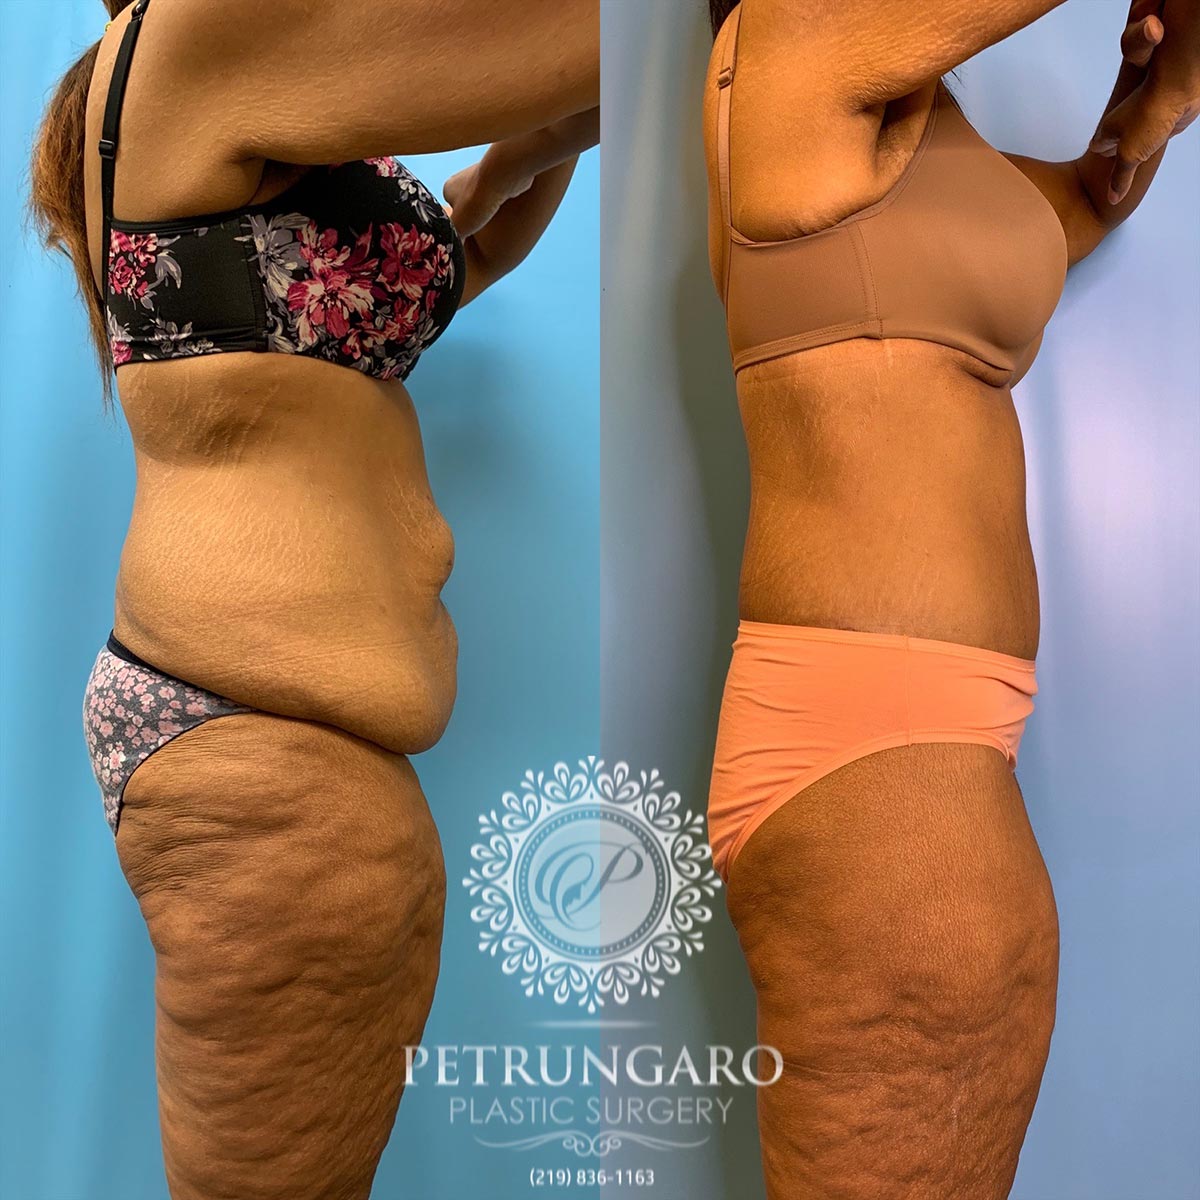 42 year old woman 3 months after a circumferential body lift-3